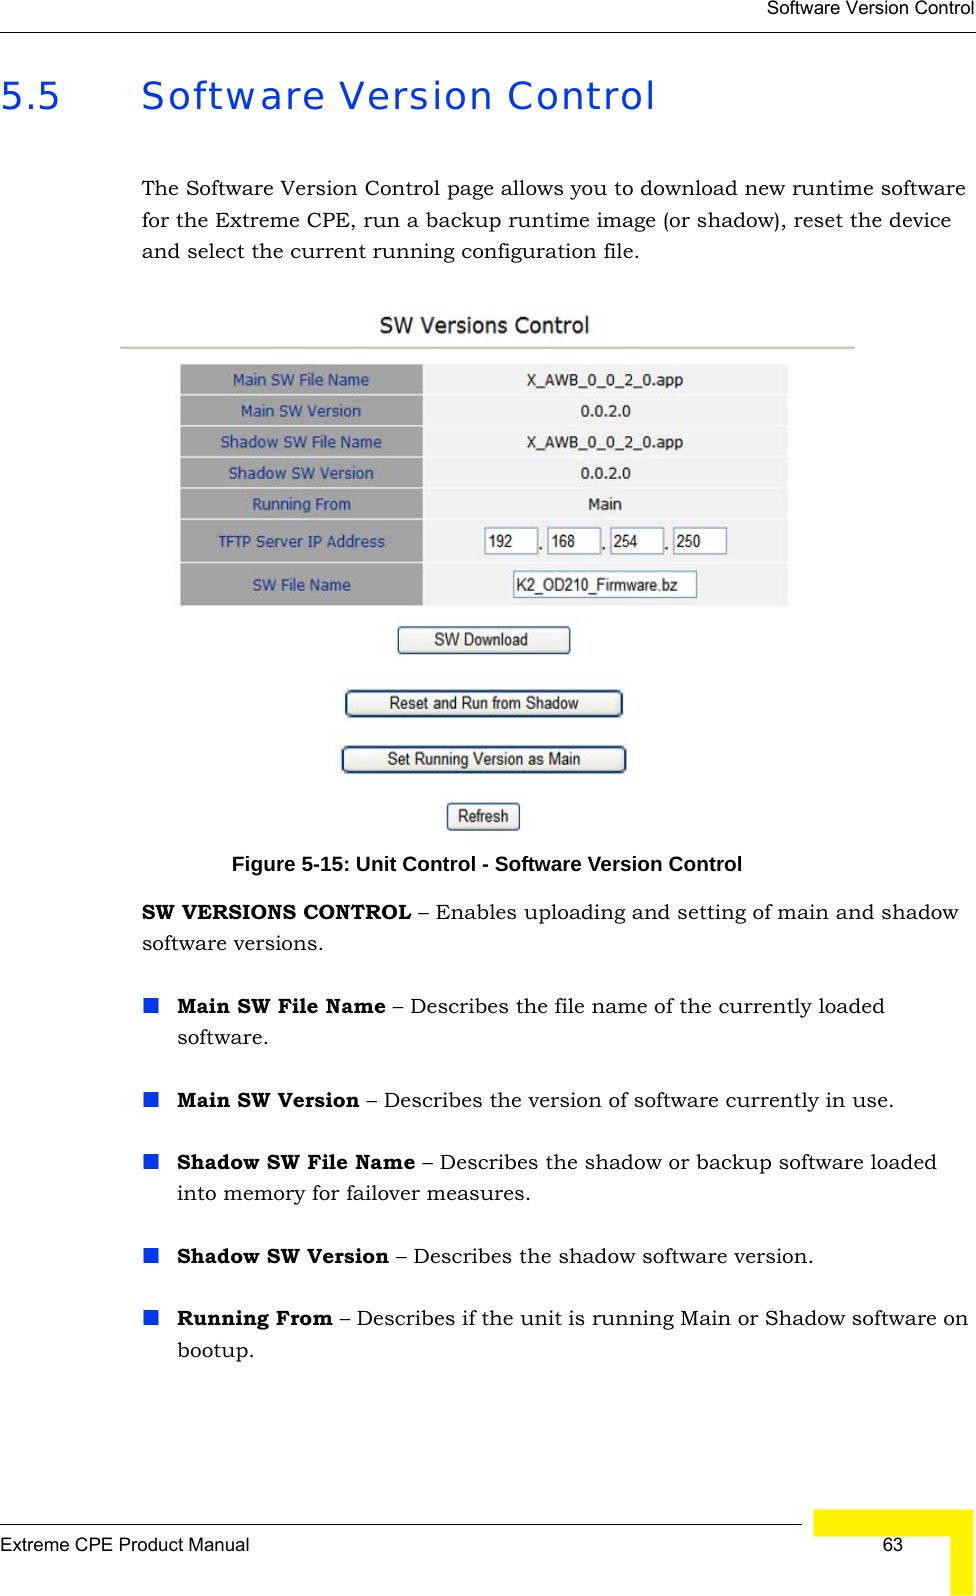 Software Version ControlExtreme CPE Product Manual  635.5 Software Version ControlThe Software Version Control page allows you to download new runtime software for the Extreme CPE, run a backup runtime image (or shadow), reset the device and select the current running configuration file.Figure 5-15: Unit Control - Software Version ControlSW VERSIONS CONTROL – Enables uploading and setting of main and shadow software versions.Main SW File Name – Describes the file name of the currently loaded software.Main SW Version – Describes the version of software currently in use.Shadow SW File Name – Describes the shadow or backup software loaded into memory for failover measures.Shadow SW Version – Describes the shadow software version.Running From – Describes if the unit is running Main or Shadow software on bootup.